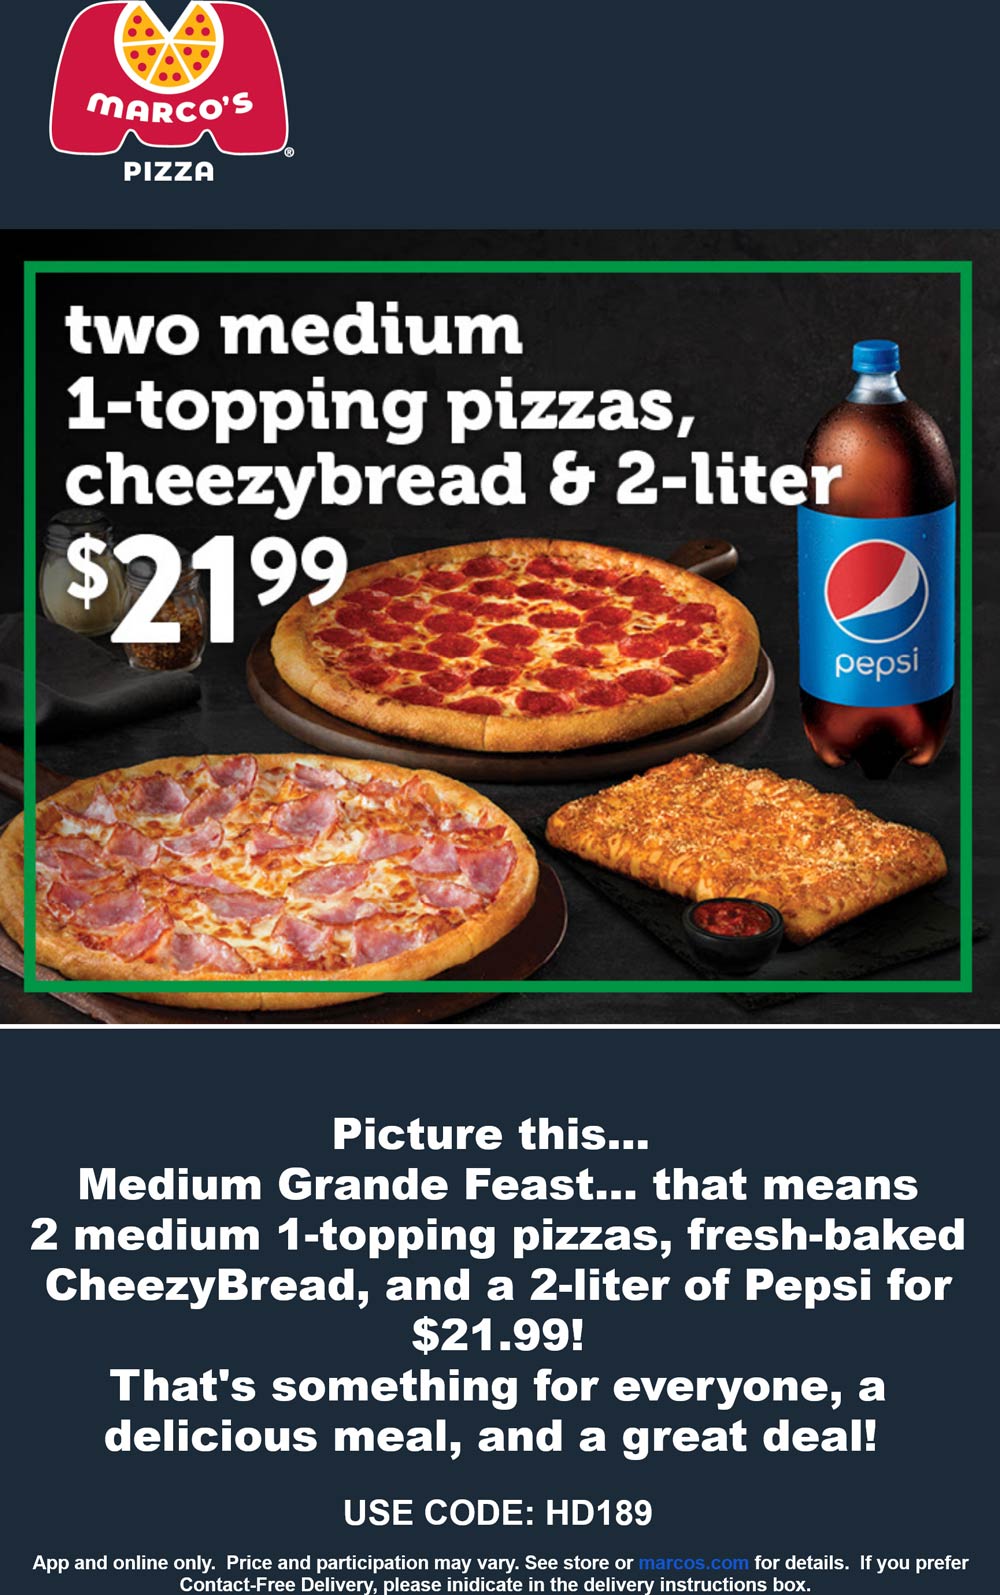 Marcos Pizza restaurants Coupon  2 pizzas  + cheezybread + 2 liter = $22 at Marcos Pizza via promo code HD189 #marcospizza 